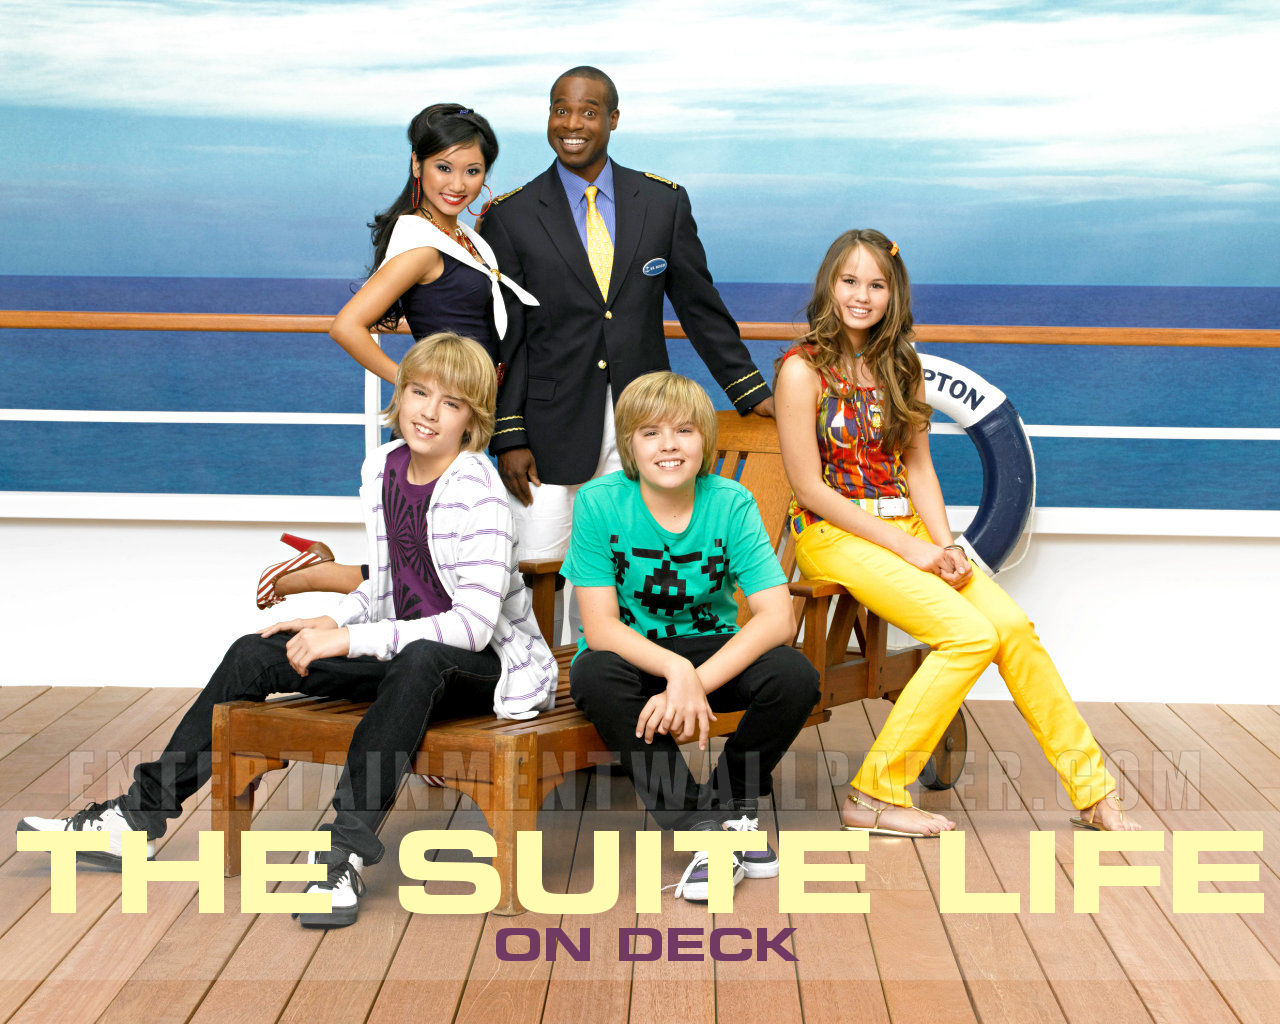 the suite life on deck season 1 free